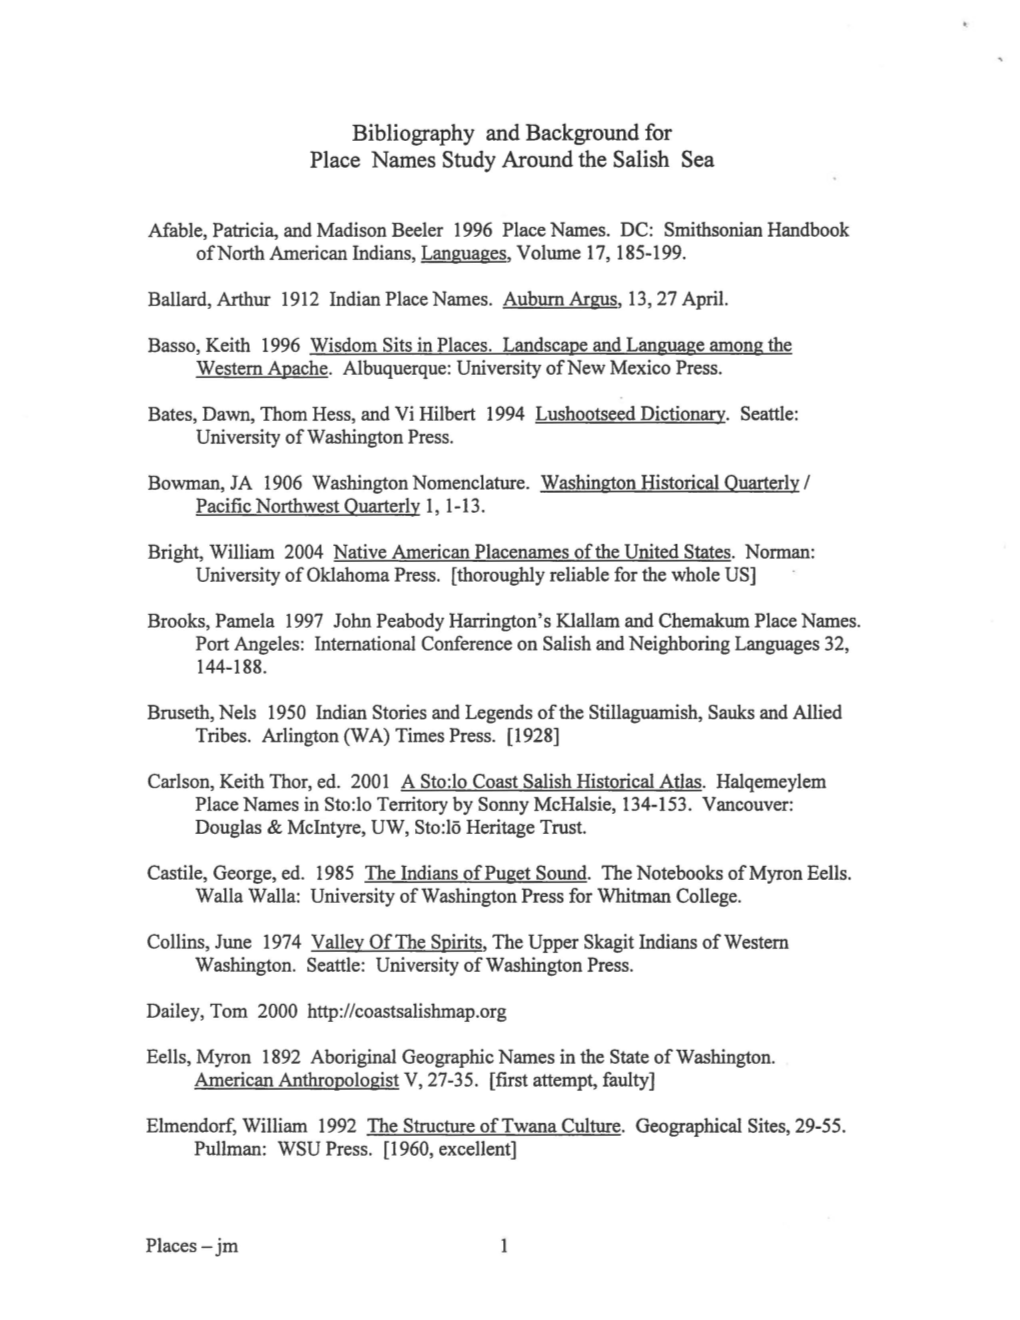 Bibliography and Background for Place Names Study Around the Salish Sea